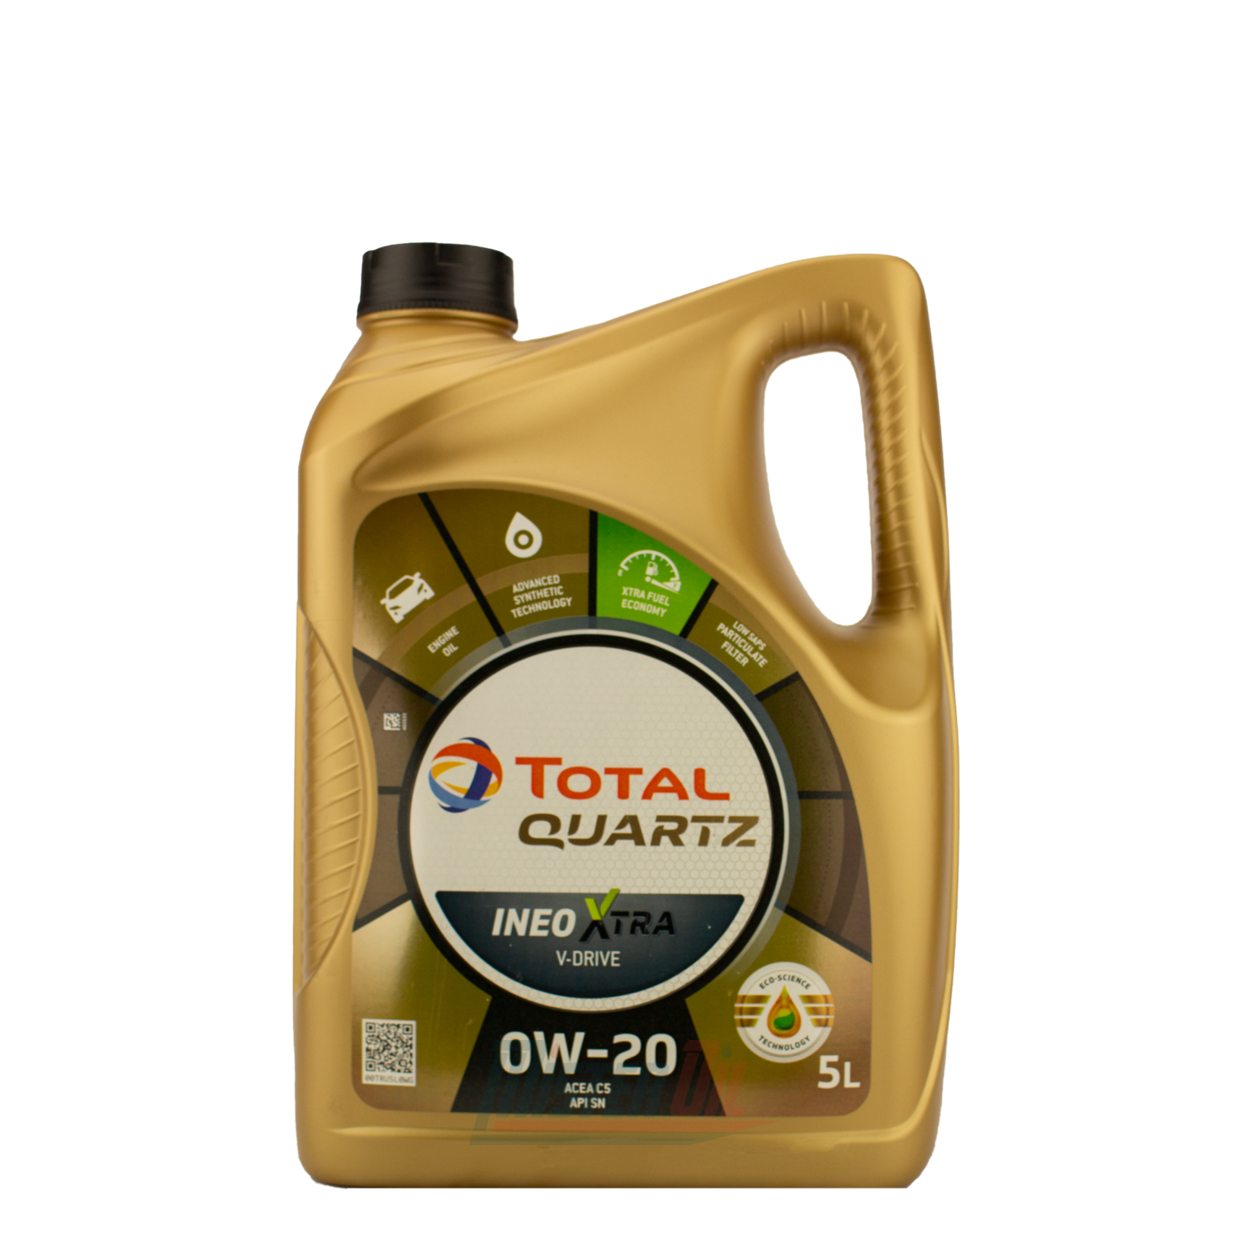 Total ineo first. Tot Quartz 9000 v-Drive 0w20. Total Quartz ineo Xtra. Total Quartz ineo Xtra v-Drive 0w-20 20l. Total ineo first 0w30.